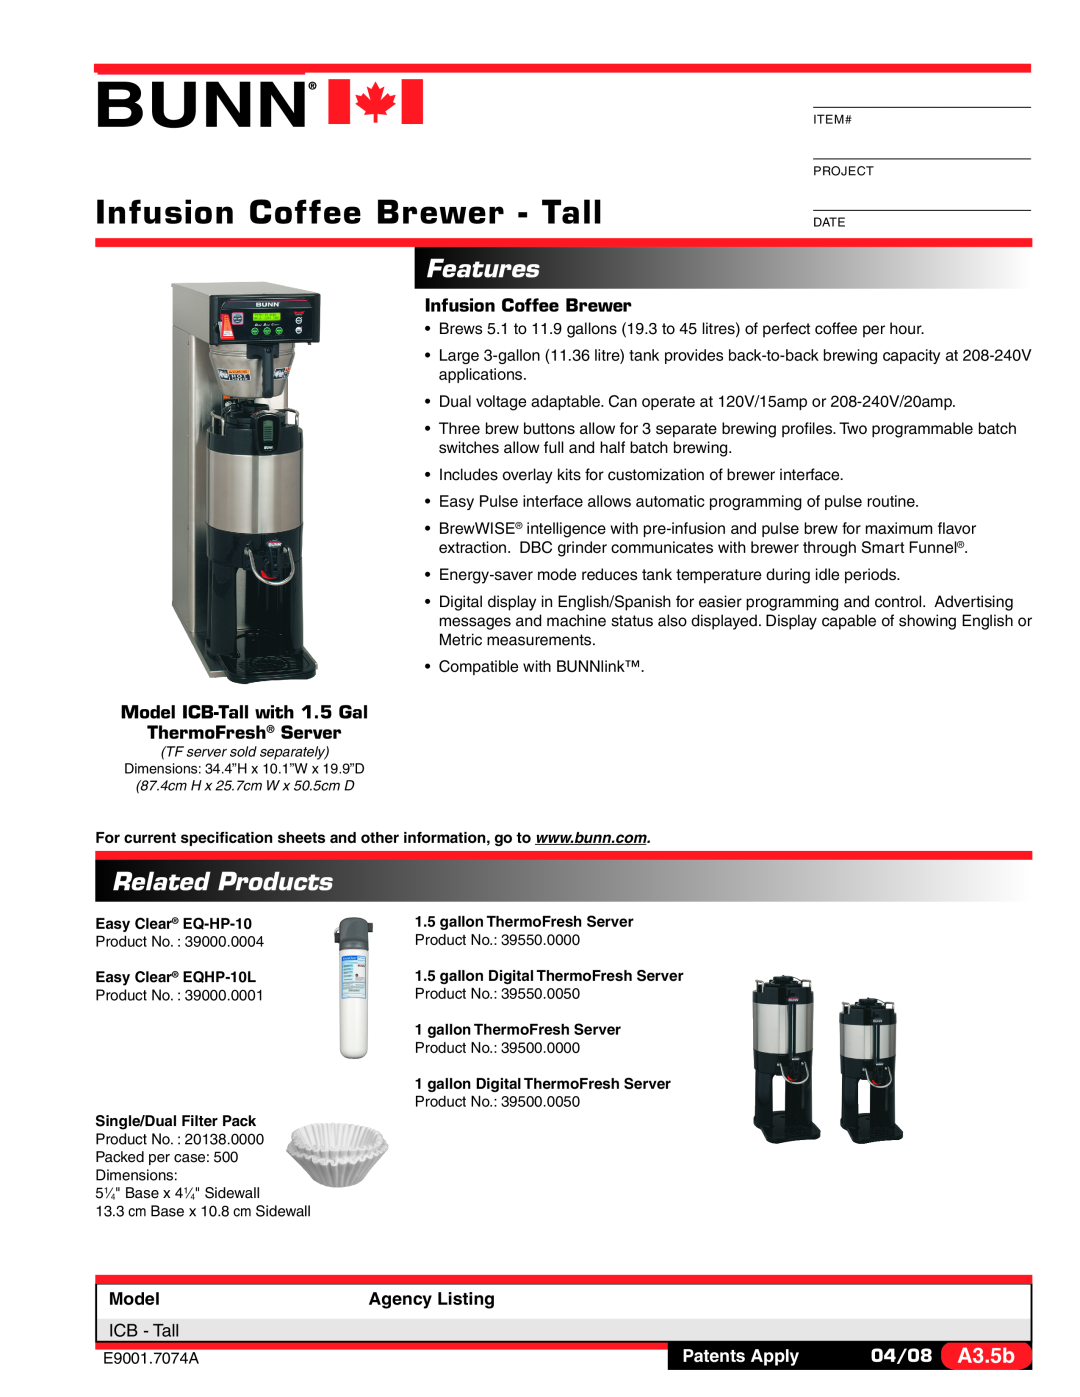 Bunn ICB-Tall specifications Features, Related Products, Infusion Coffee Brewer - Tall, Model, Agency Listing, ICB - Tall 